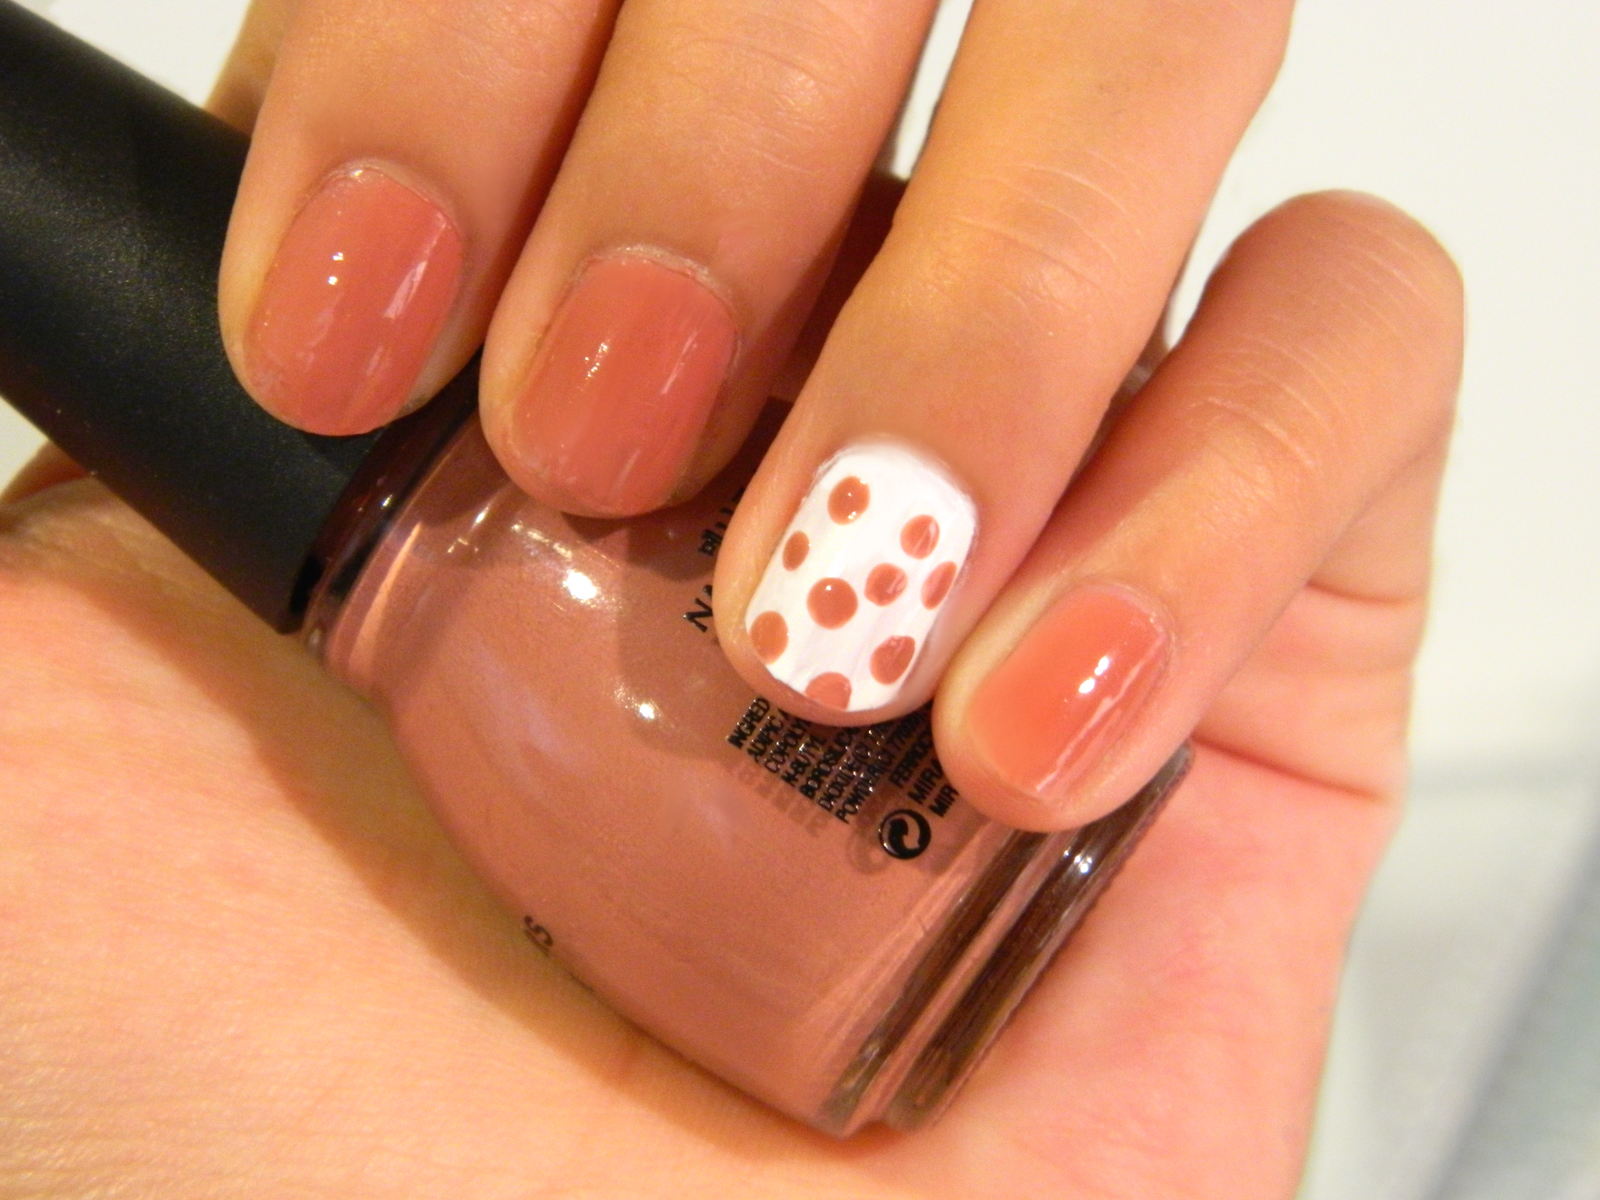 6. Pastel and Polka Dot Nail Art for Girls - wide 2